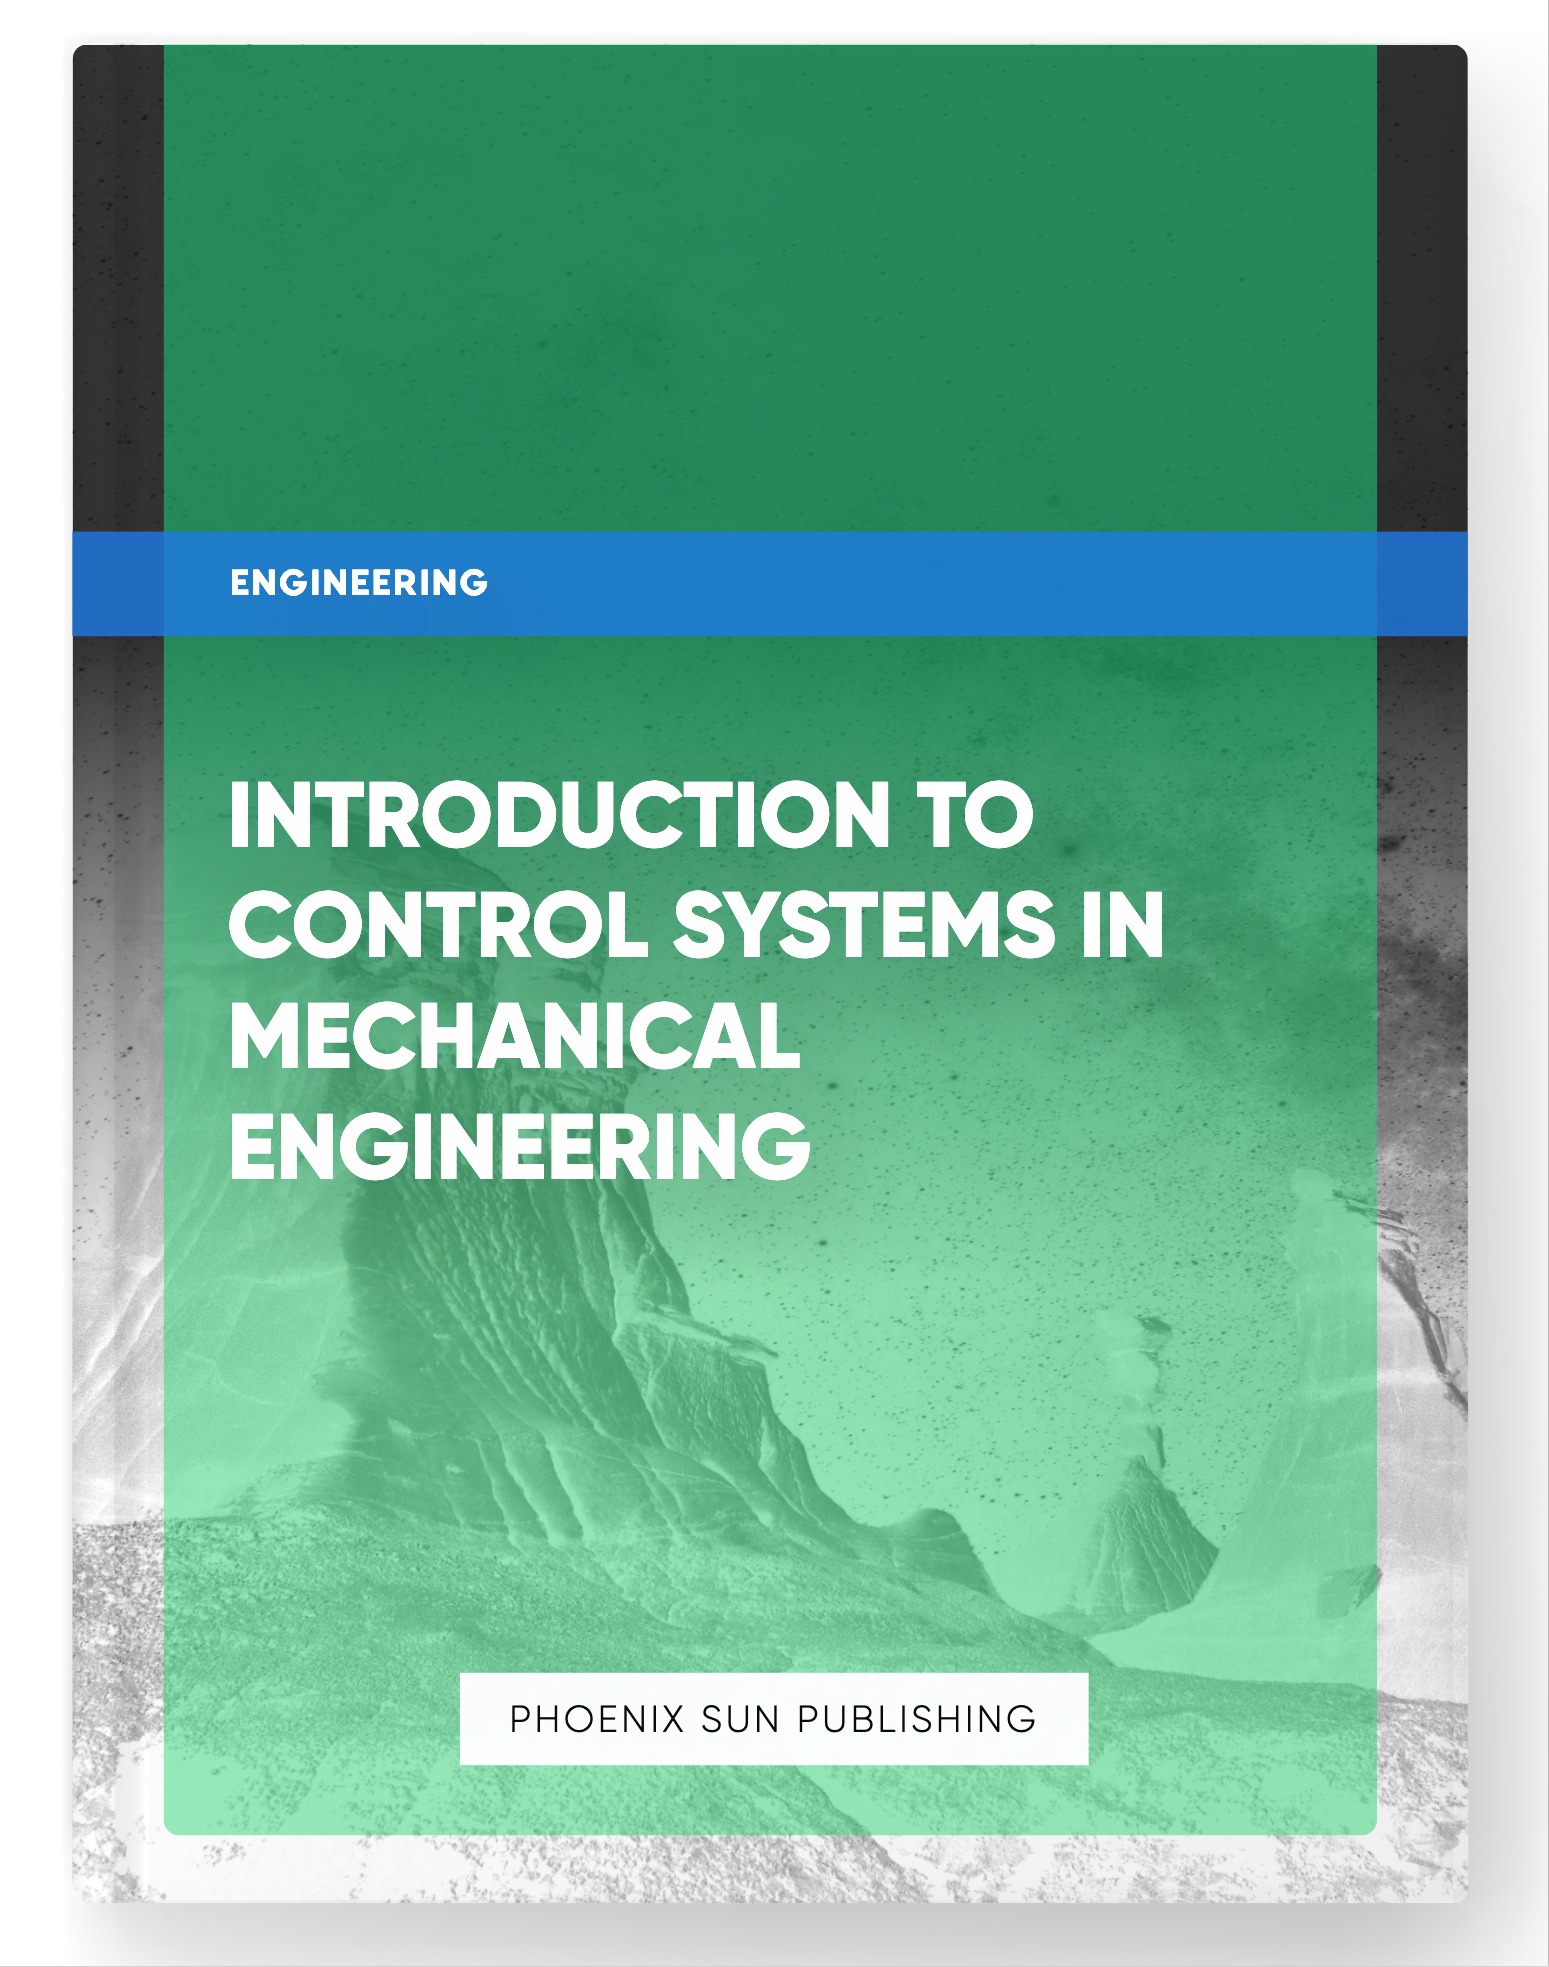 Introduction to Control Systems in Mechanical Engineering